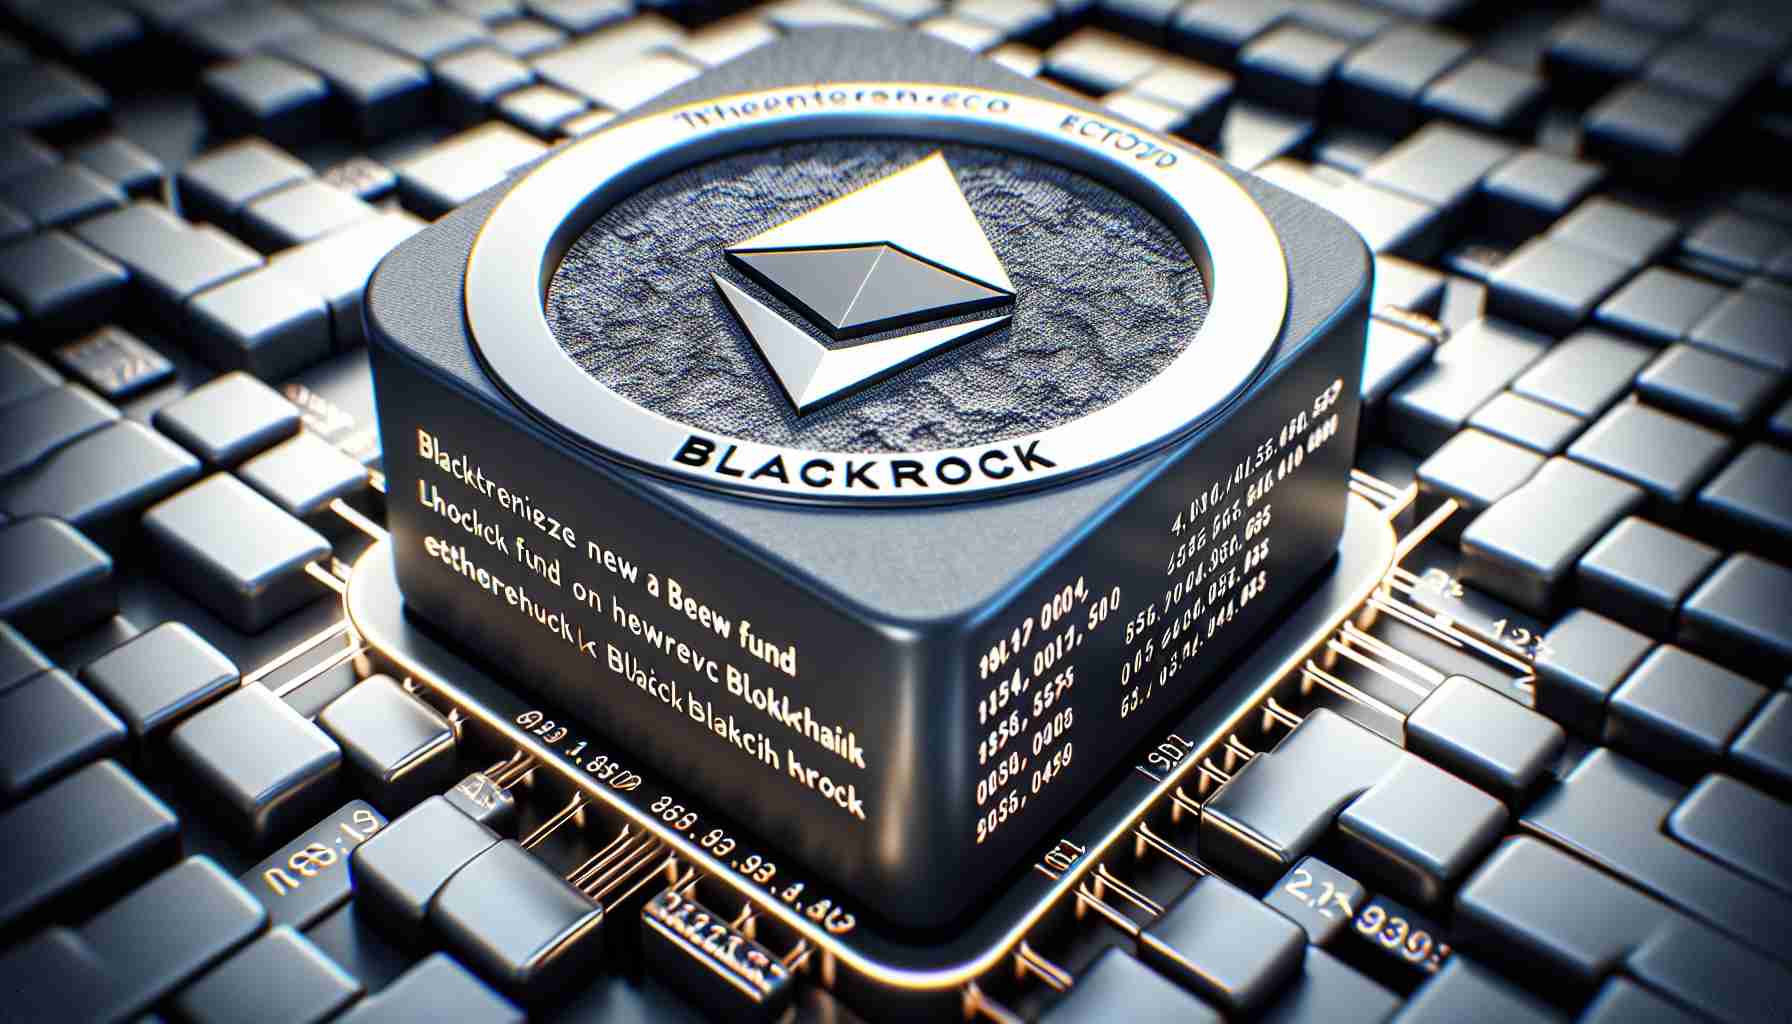 BlackRock launches first tokenized fund 'BUIDL' on Ethereum